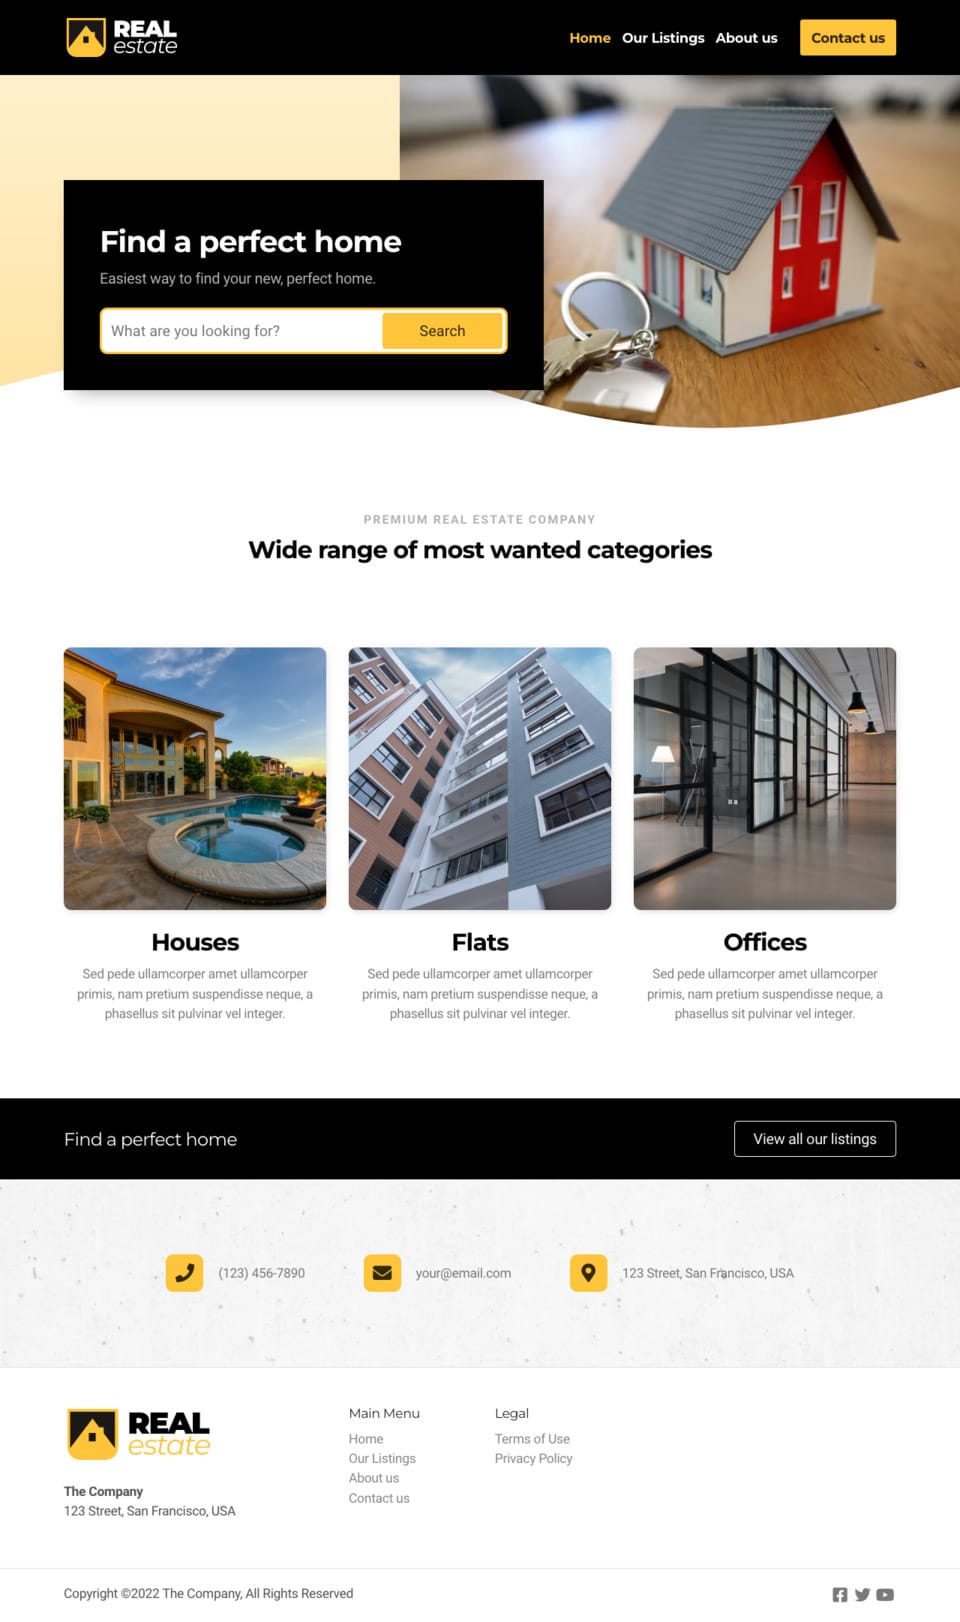 RealEstate Website Template - Ideal for real estate agents, house sellers, property managers, and anyone looking to create a professional website to showcase properties.